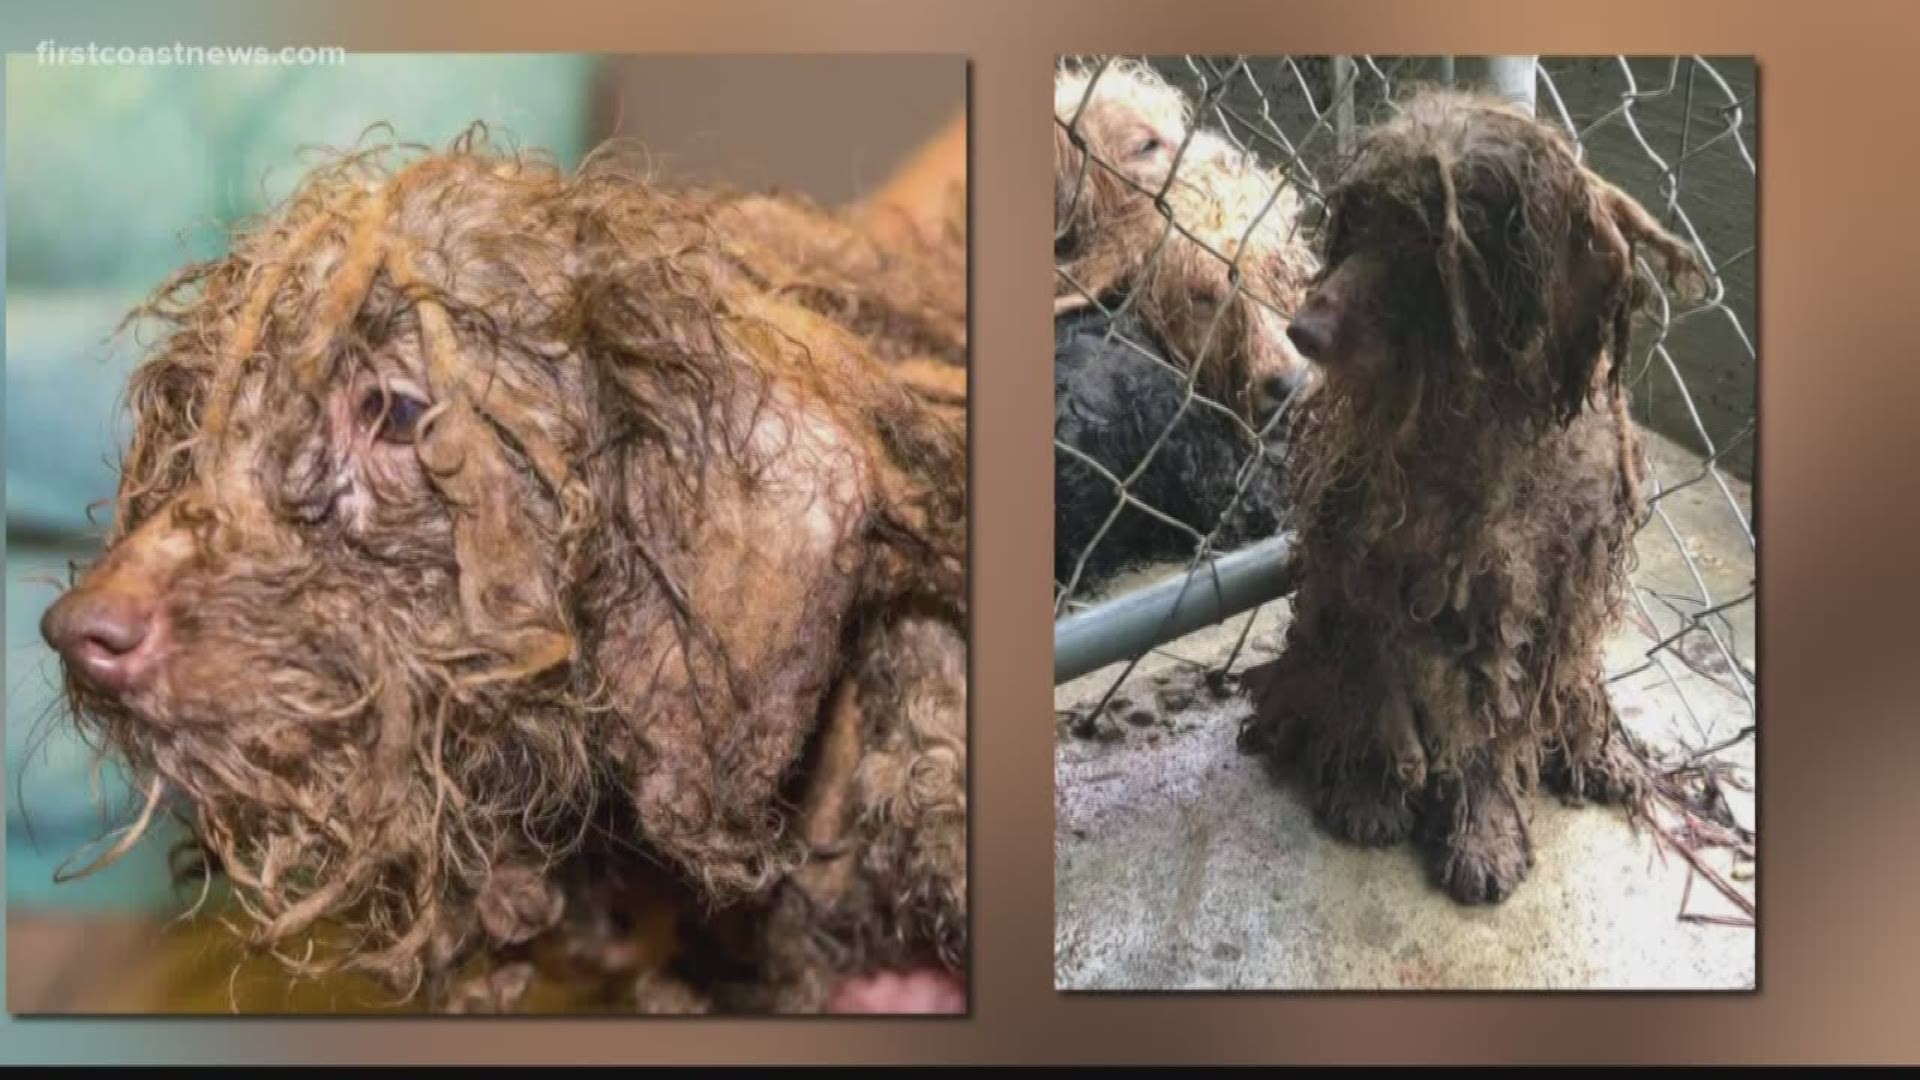 The Nassau Humane Society is taking care of 30 dogs who were found in horrendous conditions at a property in South Georgia. That's where roughly 700 dogs were living with a "licensed breeder."